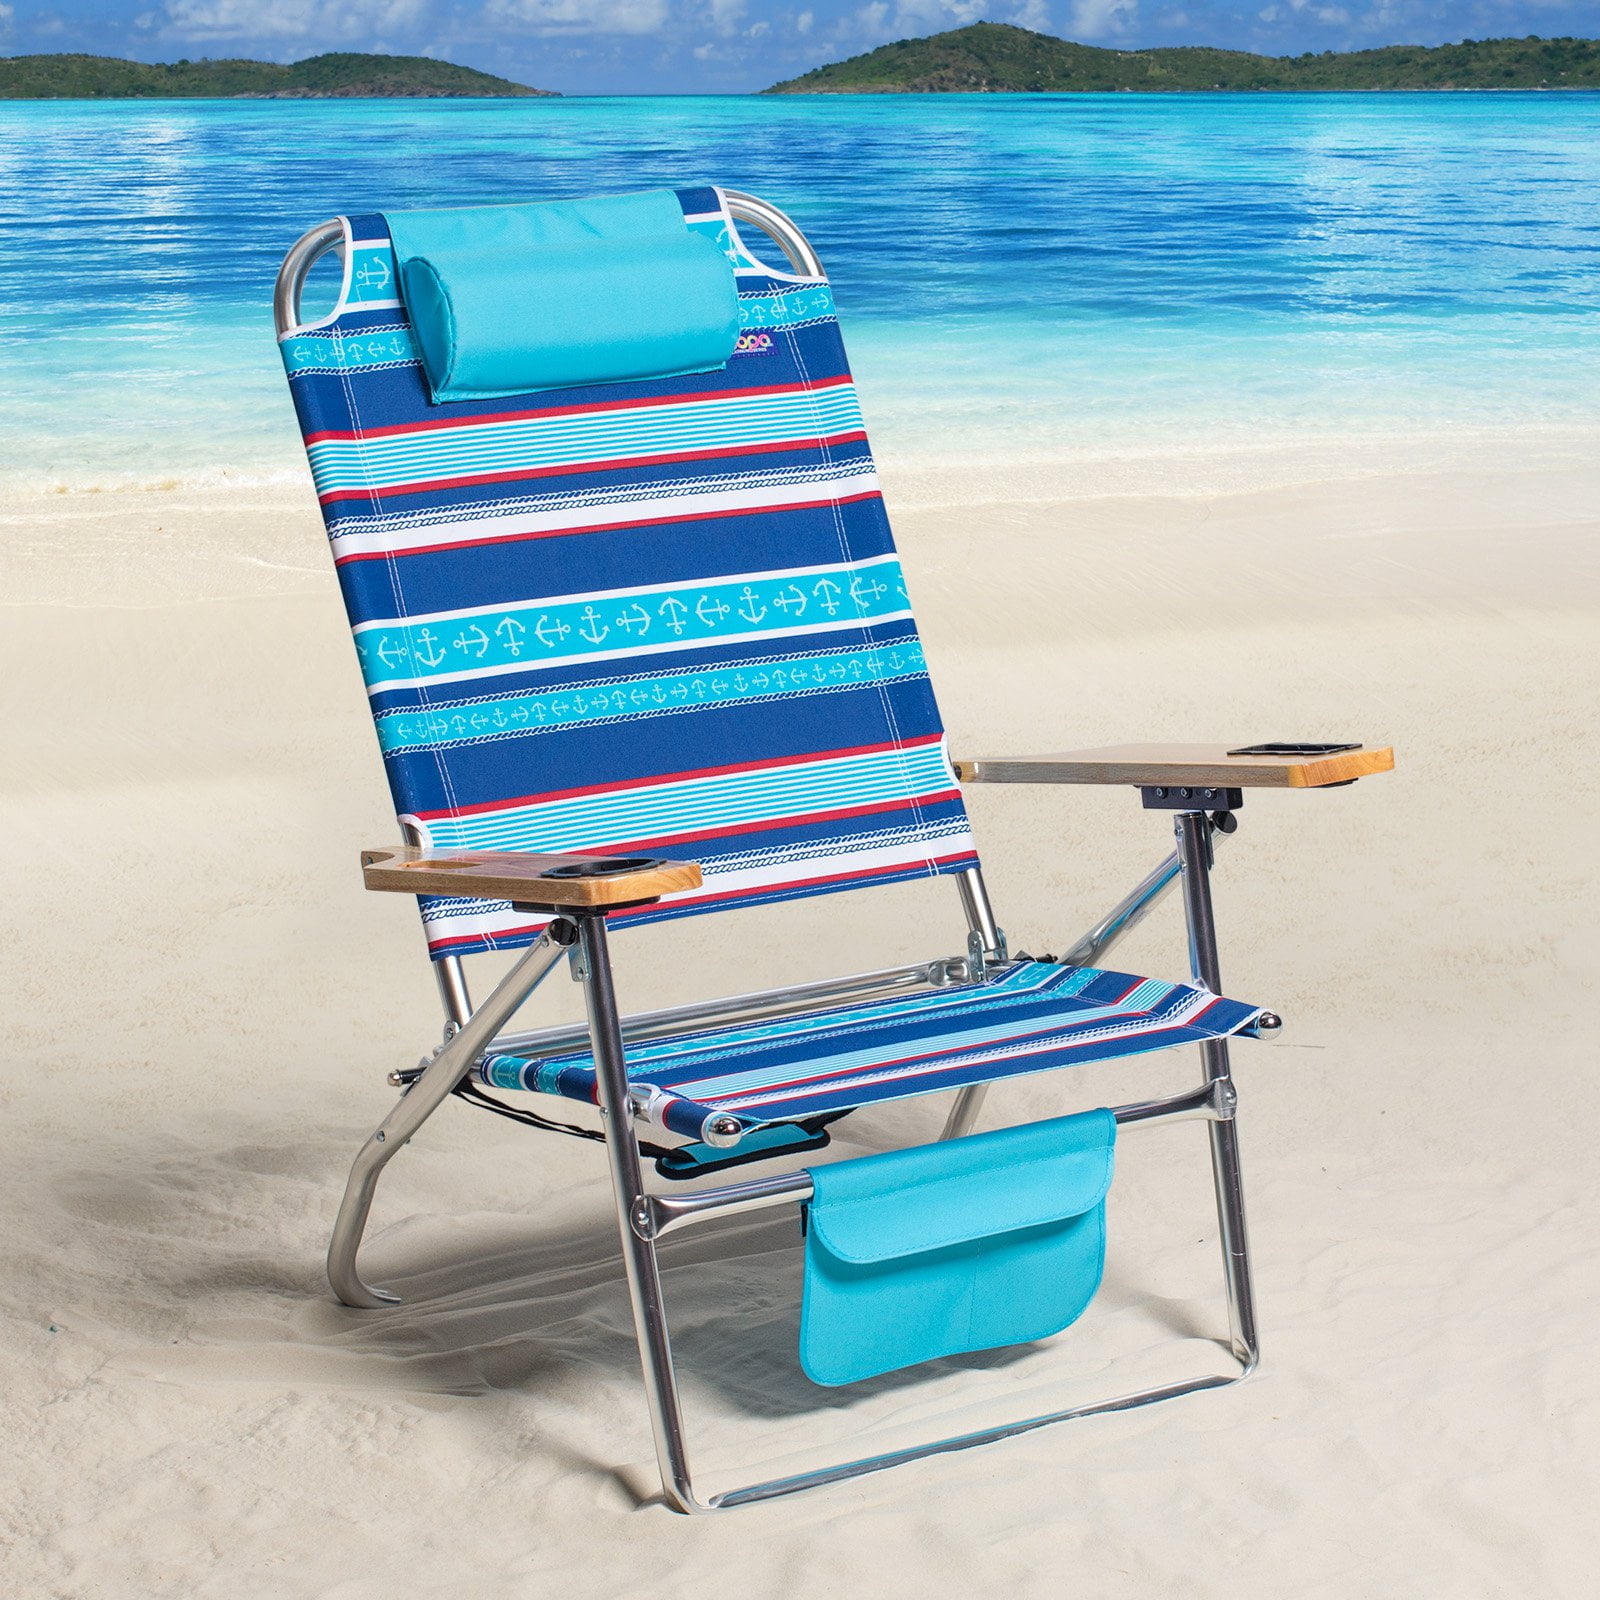 Creatice Copa Plus Beach Chair for Small Space